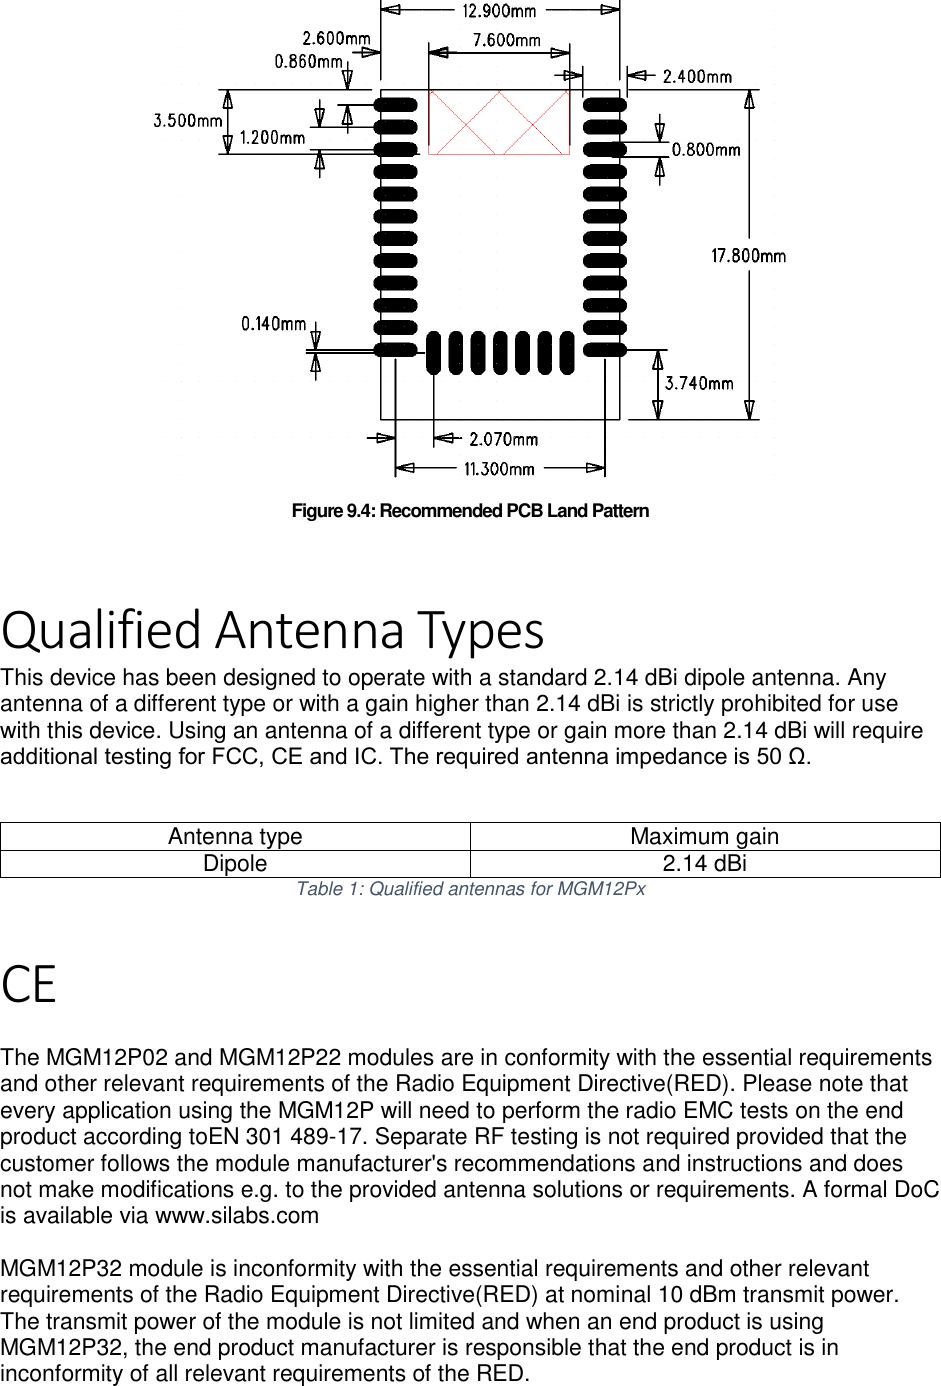 Page 2 of 7    Figure 9.4: Recommended PCB Land Pattern  Qualified Antenna Types This device has been designed to operate with a standard 2.14 dBi dipole antenna. Any antenna of a different type or with a gain higher than 2.14 dBi is strictly prohibited for use with this device. Using an antenna of a different type or gain more than 2.14 dBi will require additional testing for FCC, CE and IC. The required antenna impedance is 50 Ω.   Antenna type Maximum gain Dipole 2.14 dBi Table 1: Qualified antennas for MGM12Px  CE  The MGM12P02 and MGM12P22 modules are in conformity with the essential requirements and other relevant requirements of the Radio Equipment Directive(RED). Please note that every application using the MGM12P will need to perform the radio EMC tests on the end product according toEN 301 489-17. Separate RF testing is not required provided that the customer follows the module manufacturer&apos;s recommendations and instructions and does not make modifications e.g. to the provided antenna solutions or requirements. A formal DoC is available via www.silabs.com  MGM12P32 module is inconformity with the essential requirements and other relevant requirements of the Radio Equipment Directive(RED) at nominal 10 dBm transmit power. The transmit power of the module is not limited and when an end product is using MGM12P32, the end product manufacturer is responsible that the end product is in inconformity of all relevant requirements of the RED.  